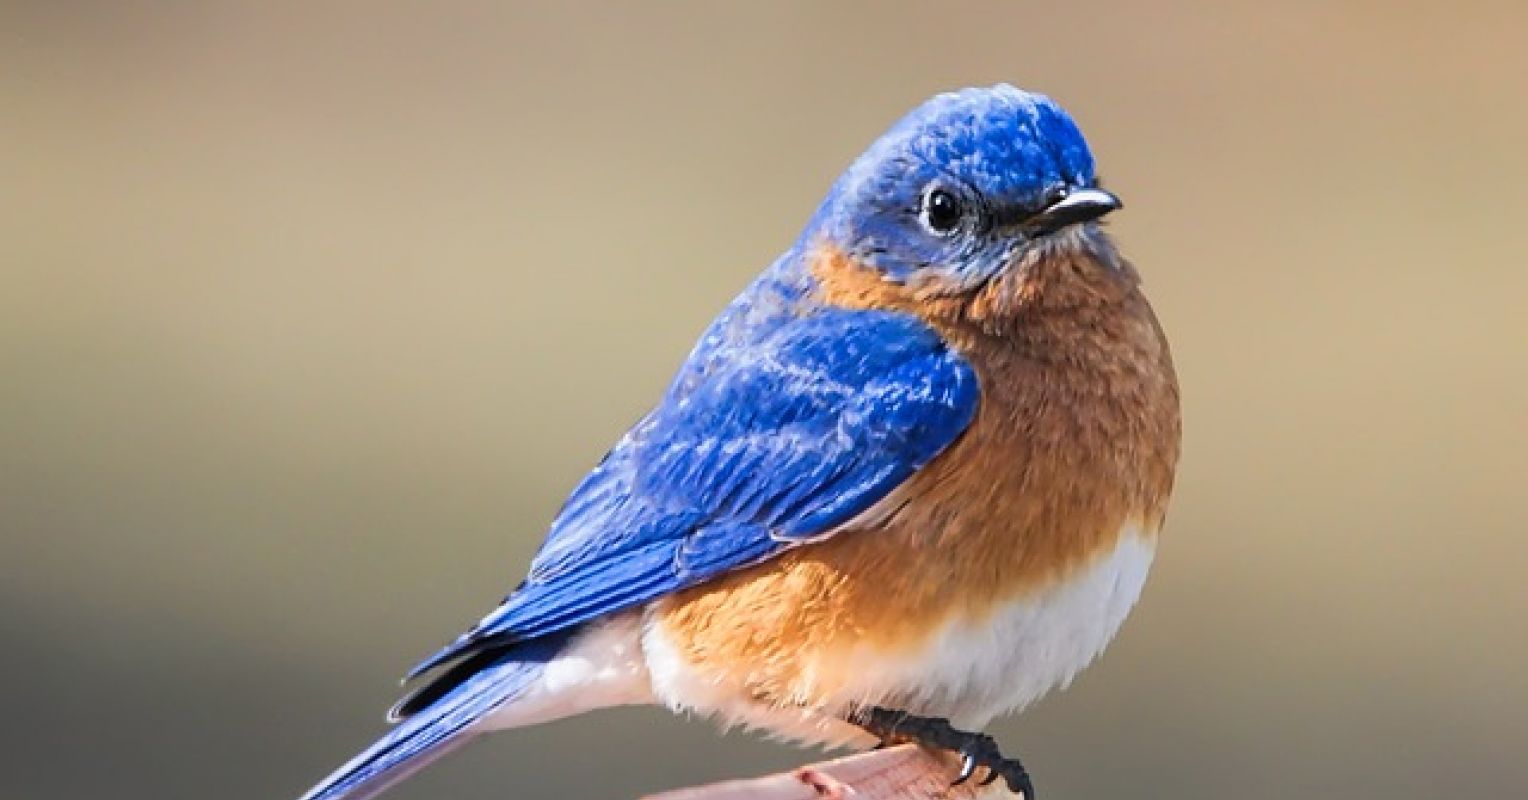 A Passion for Bluebirds